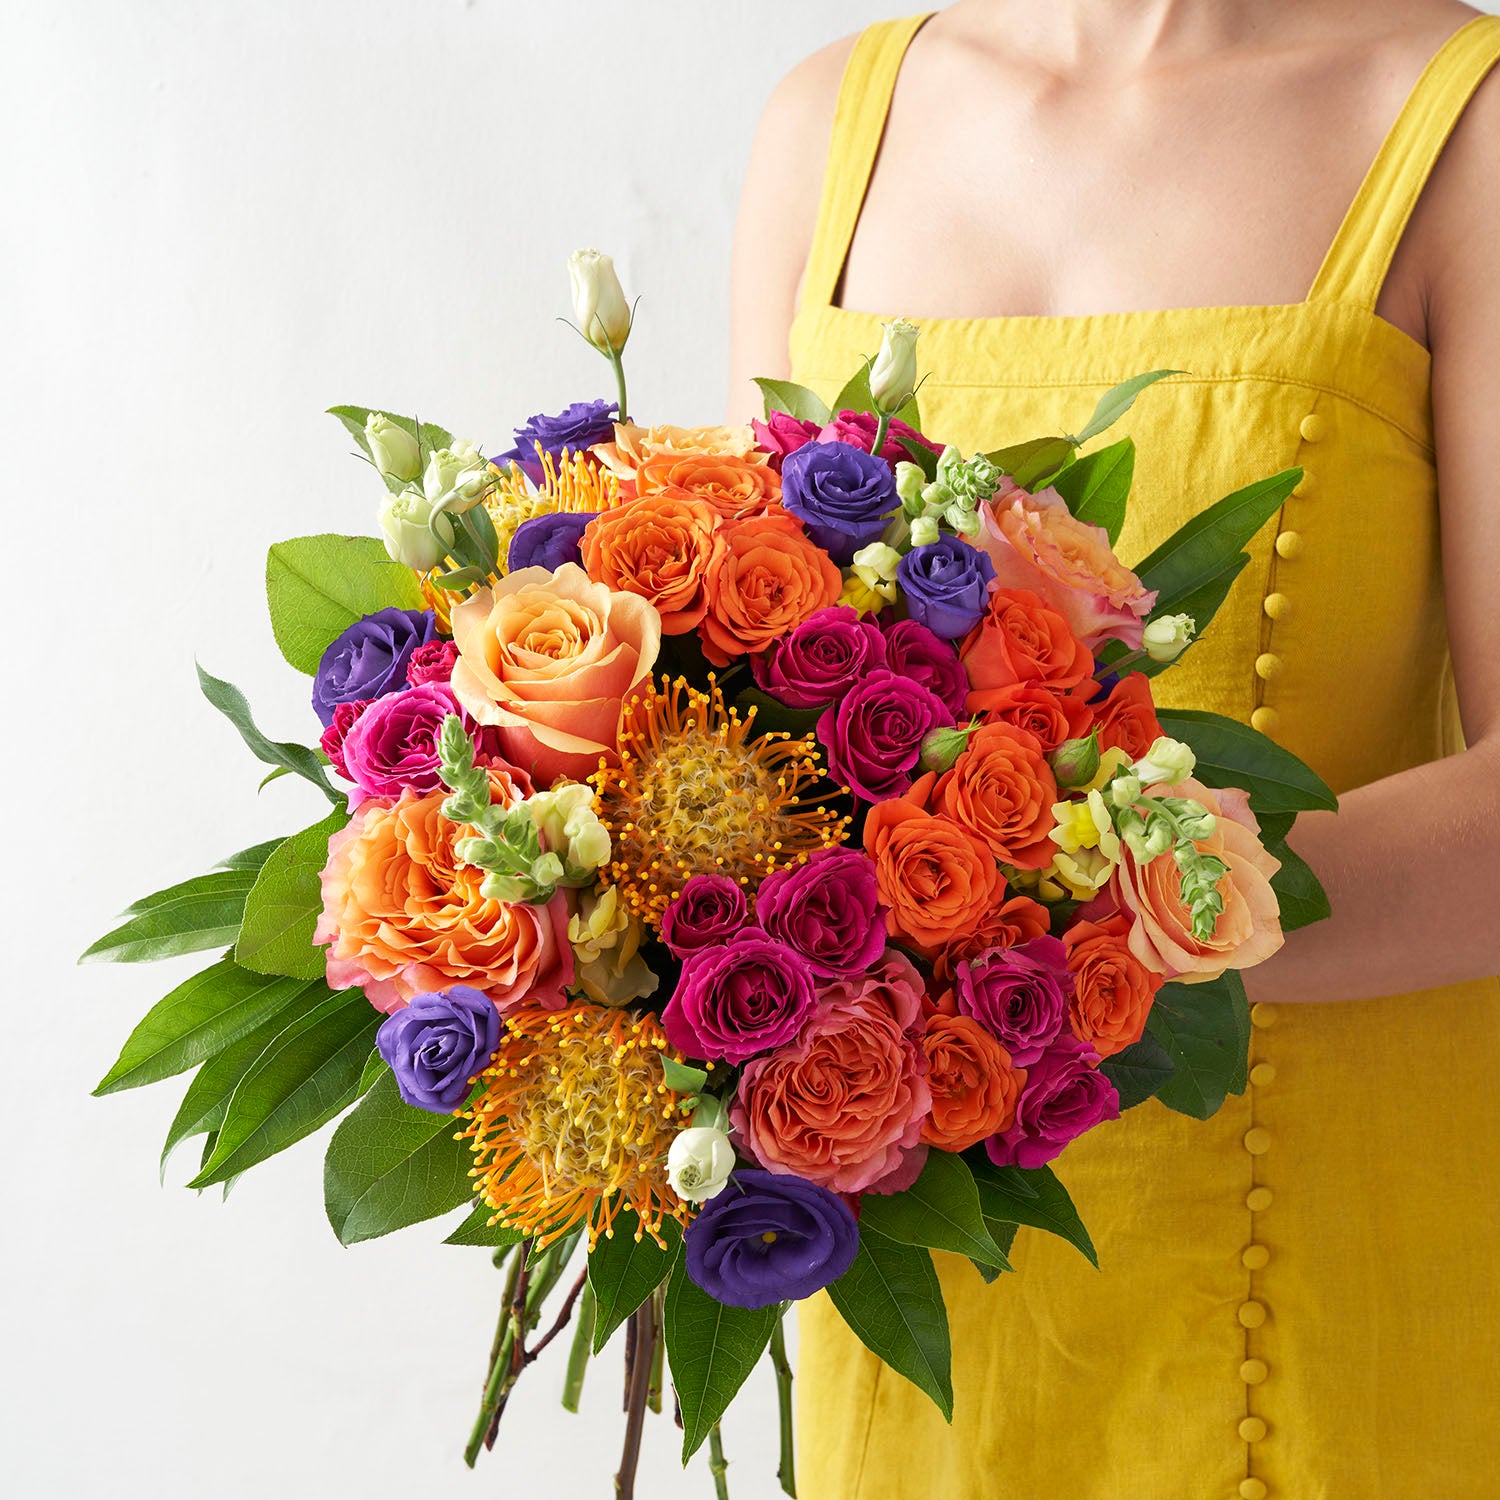 Woman in yellow dress holding bright orange, purple, and hot pink round bouquet. 